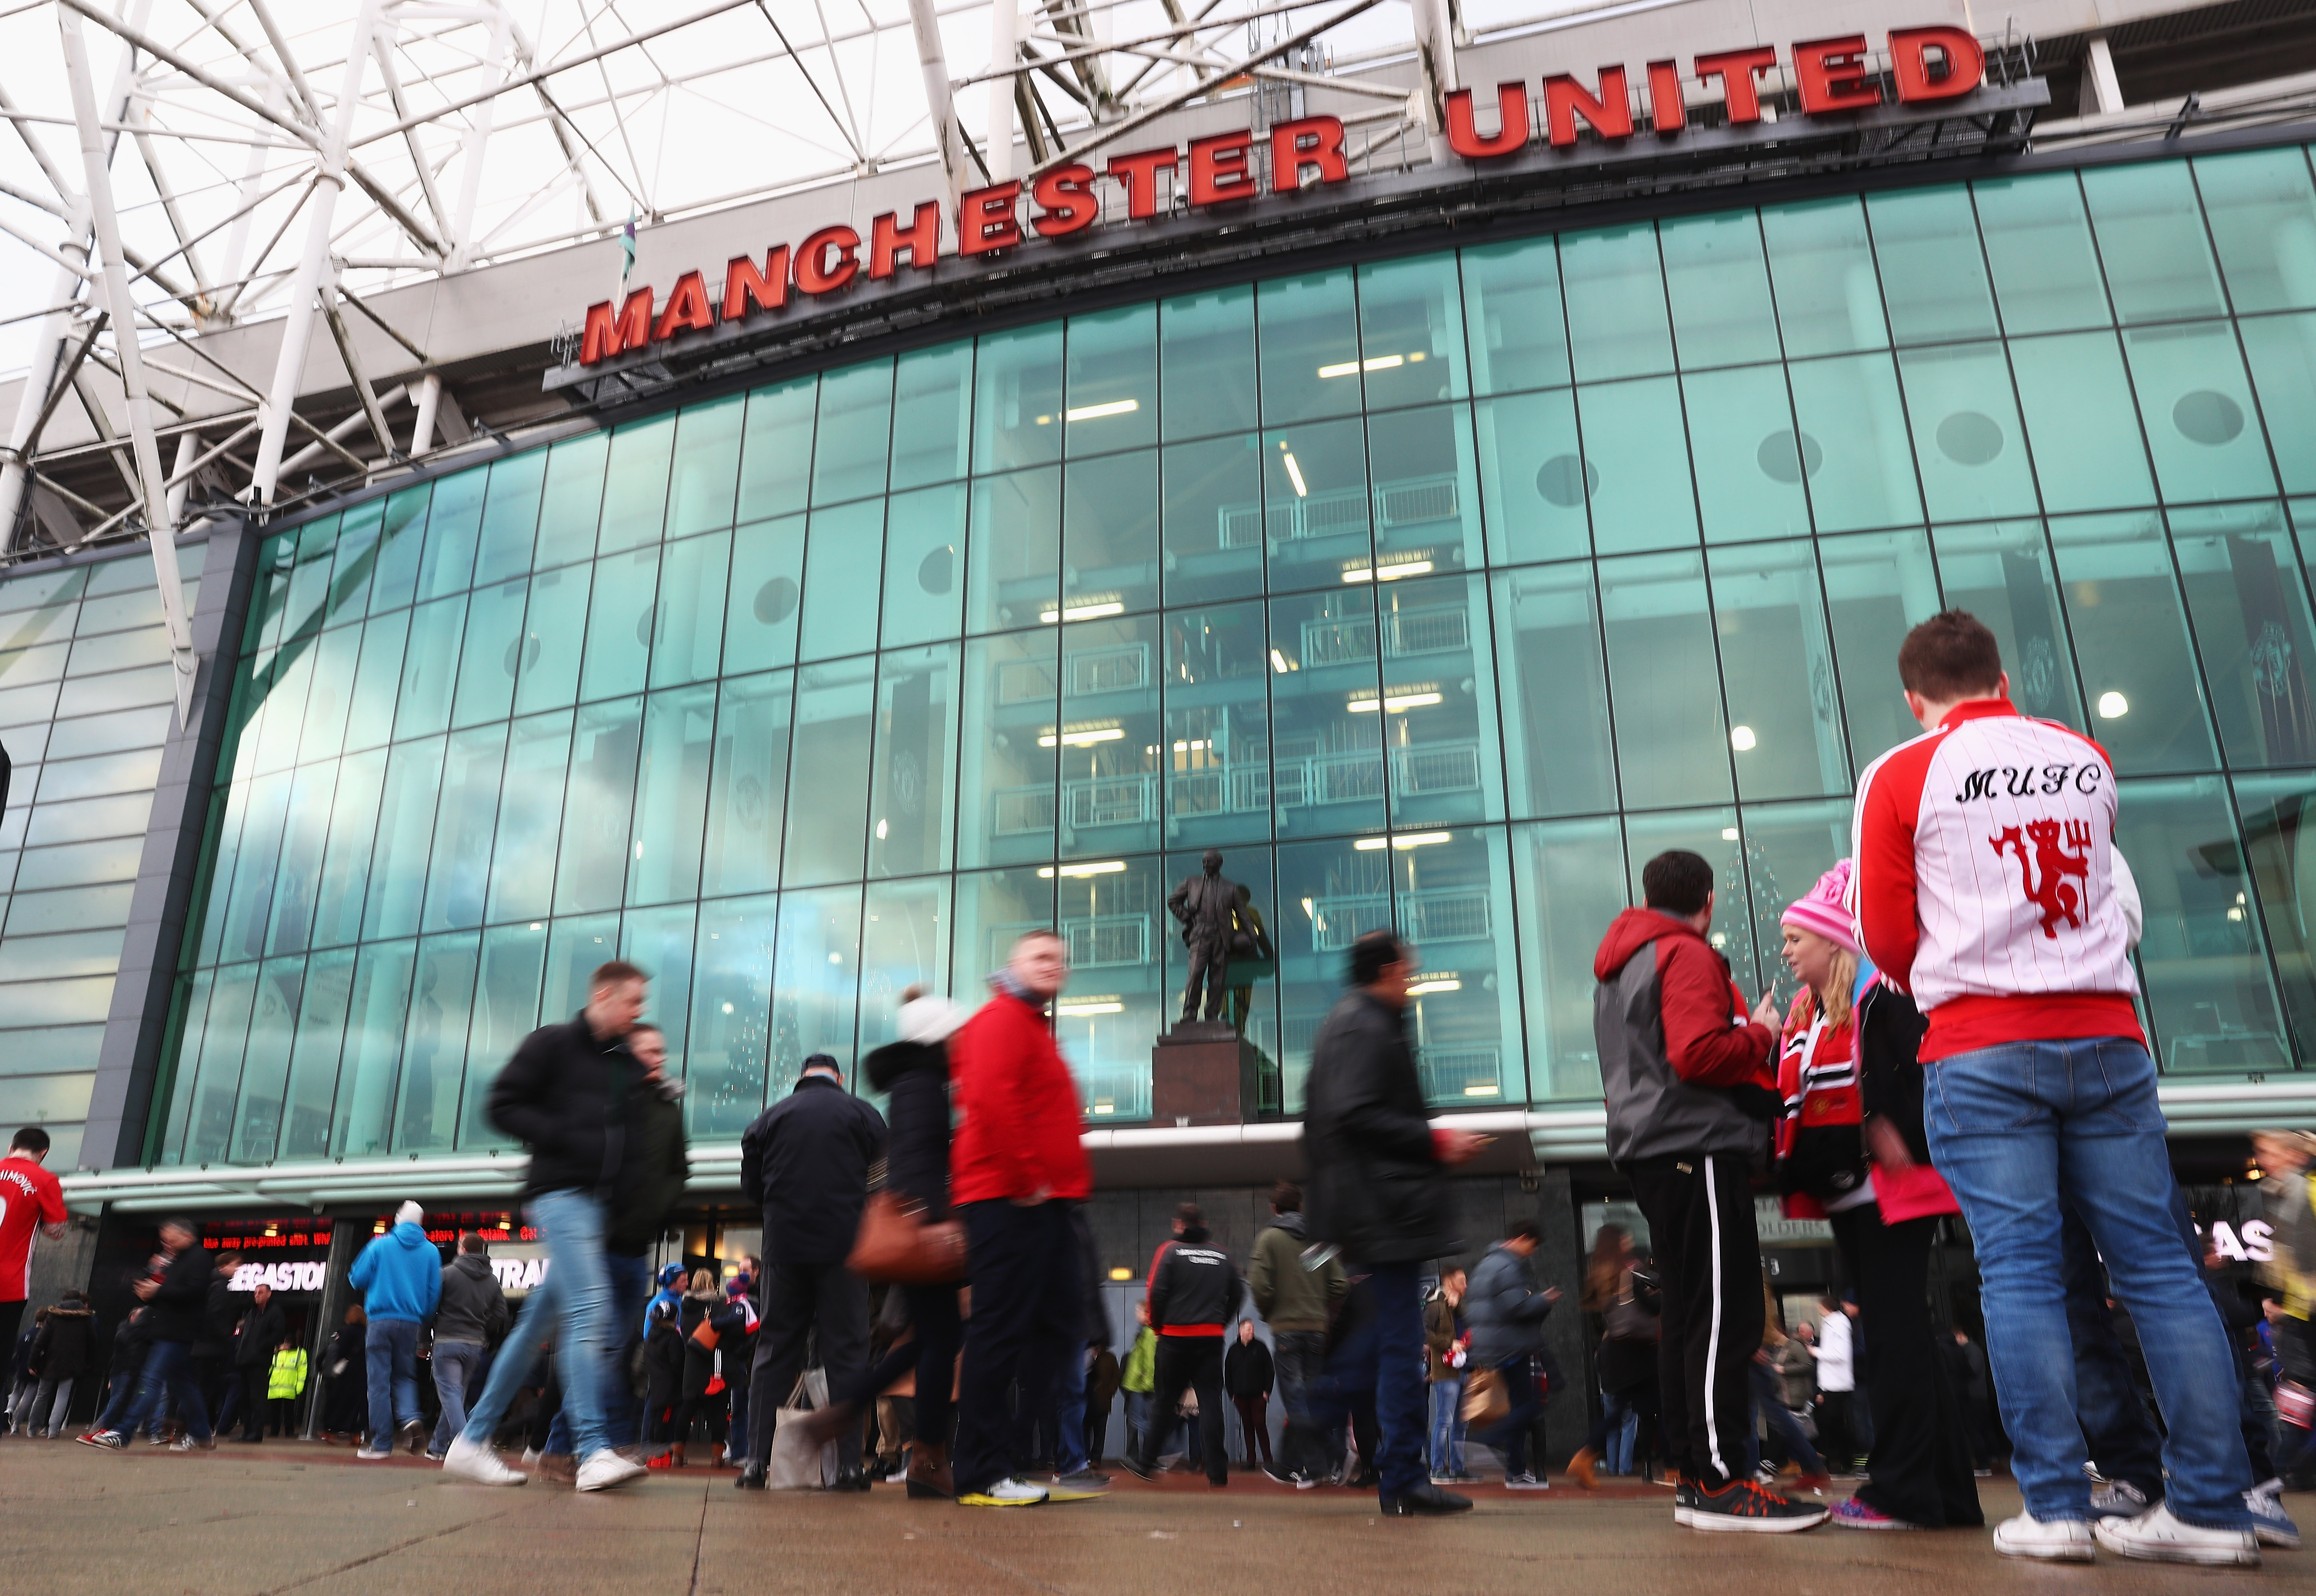 MANCHESTER, ENGLAND - DECEMBER 31:  Fans arrive prior to the Premier League match between Manchester United and Middlesbrough at Old Trafford on December 31, 2016 in Manchester, England.  (Photo by Matthew Lewis/Getty Images)